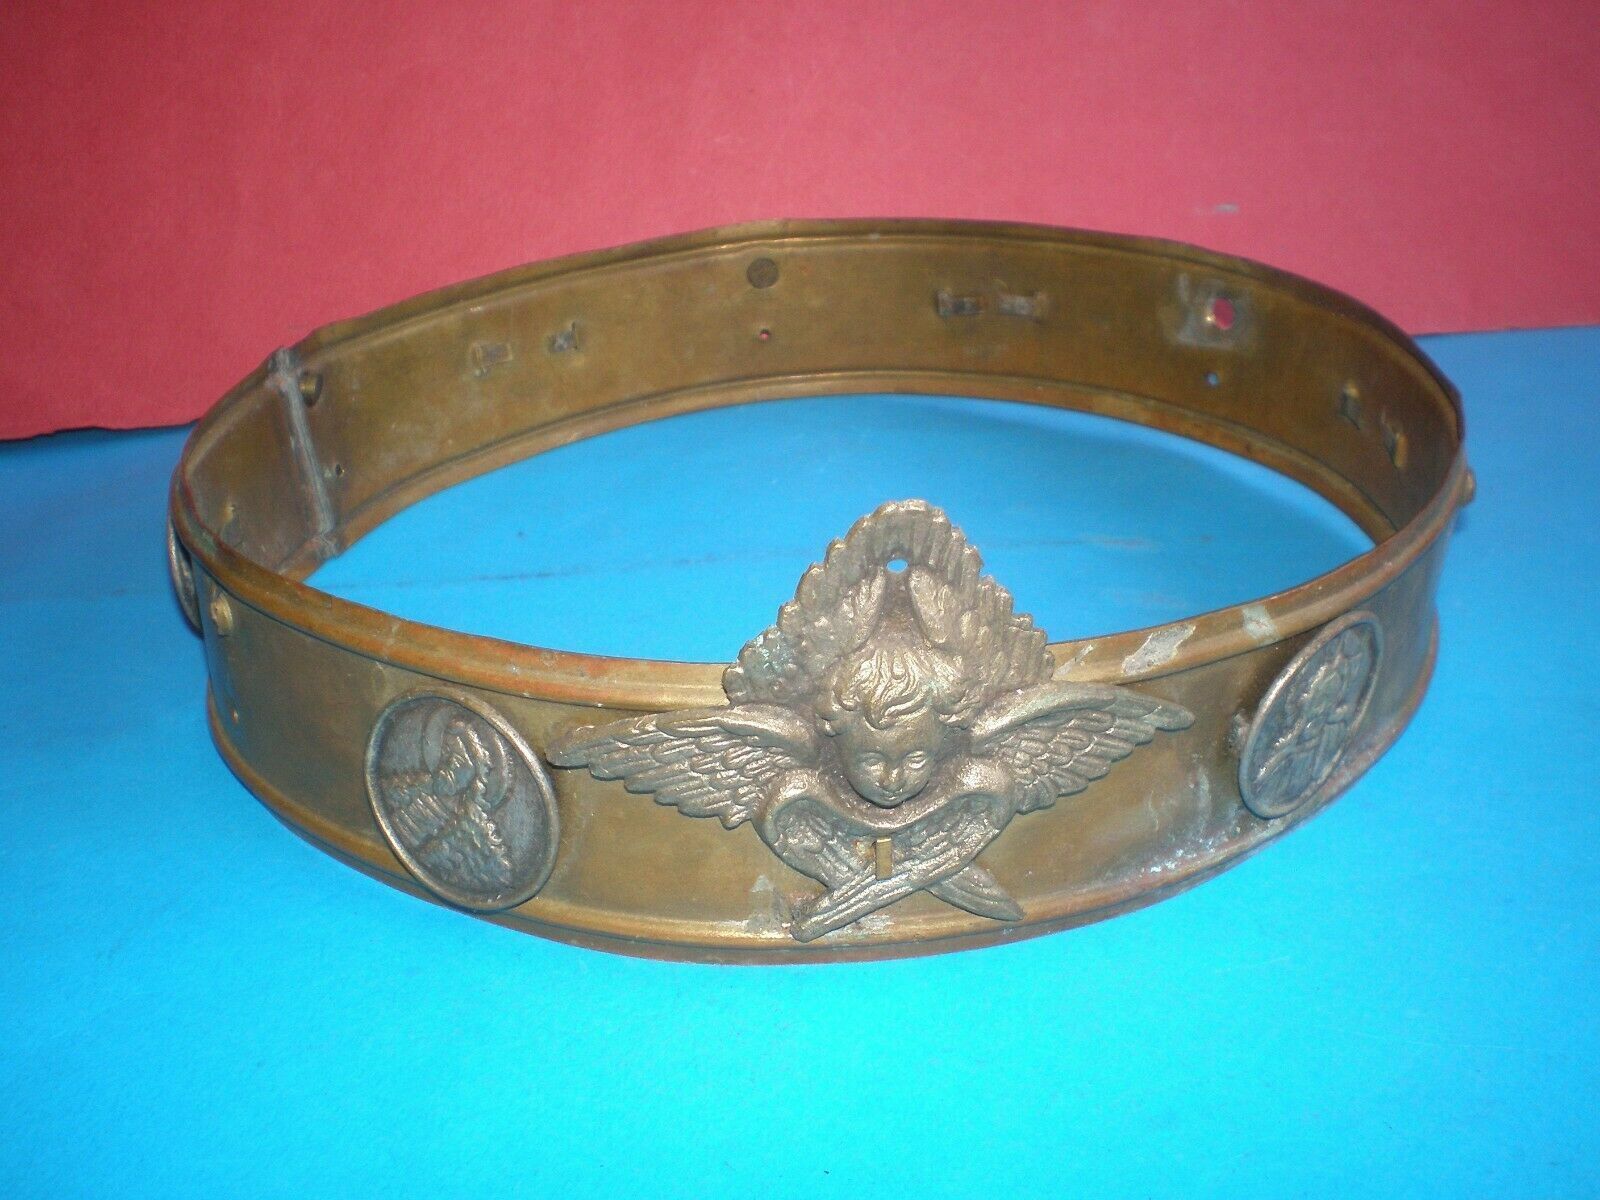 Ancient Russian crown decorated with a Cherub and images of Saints - Very rare